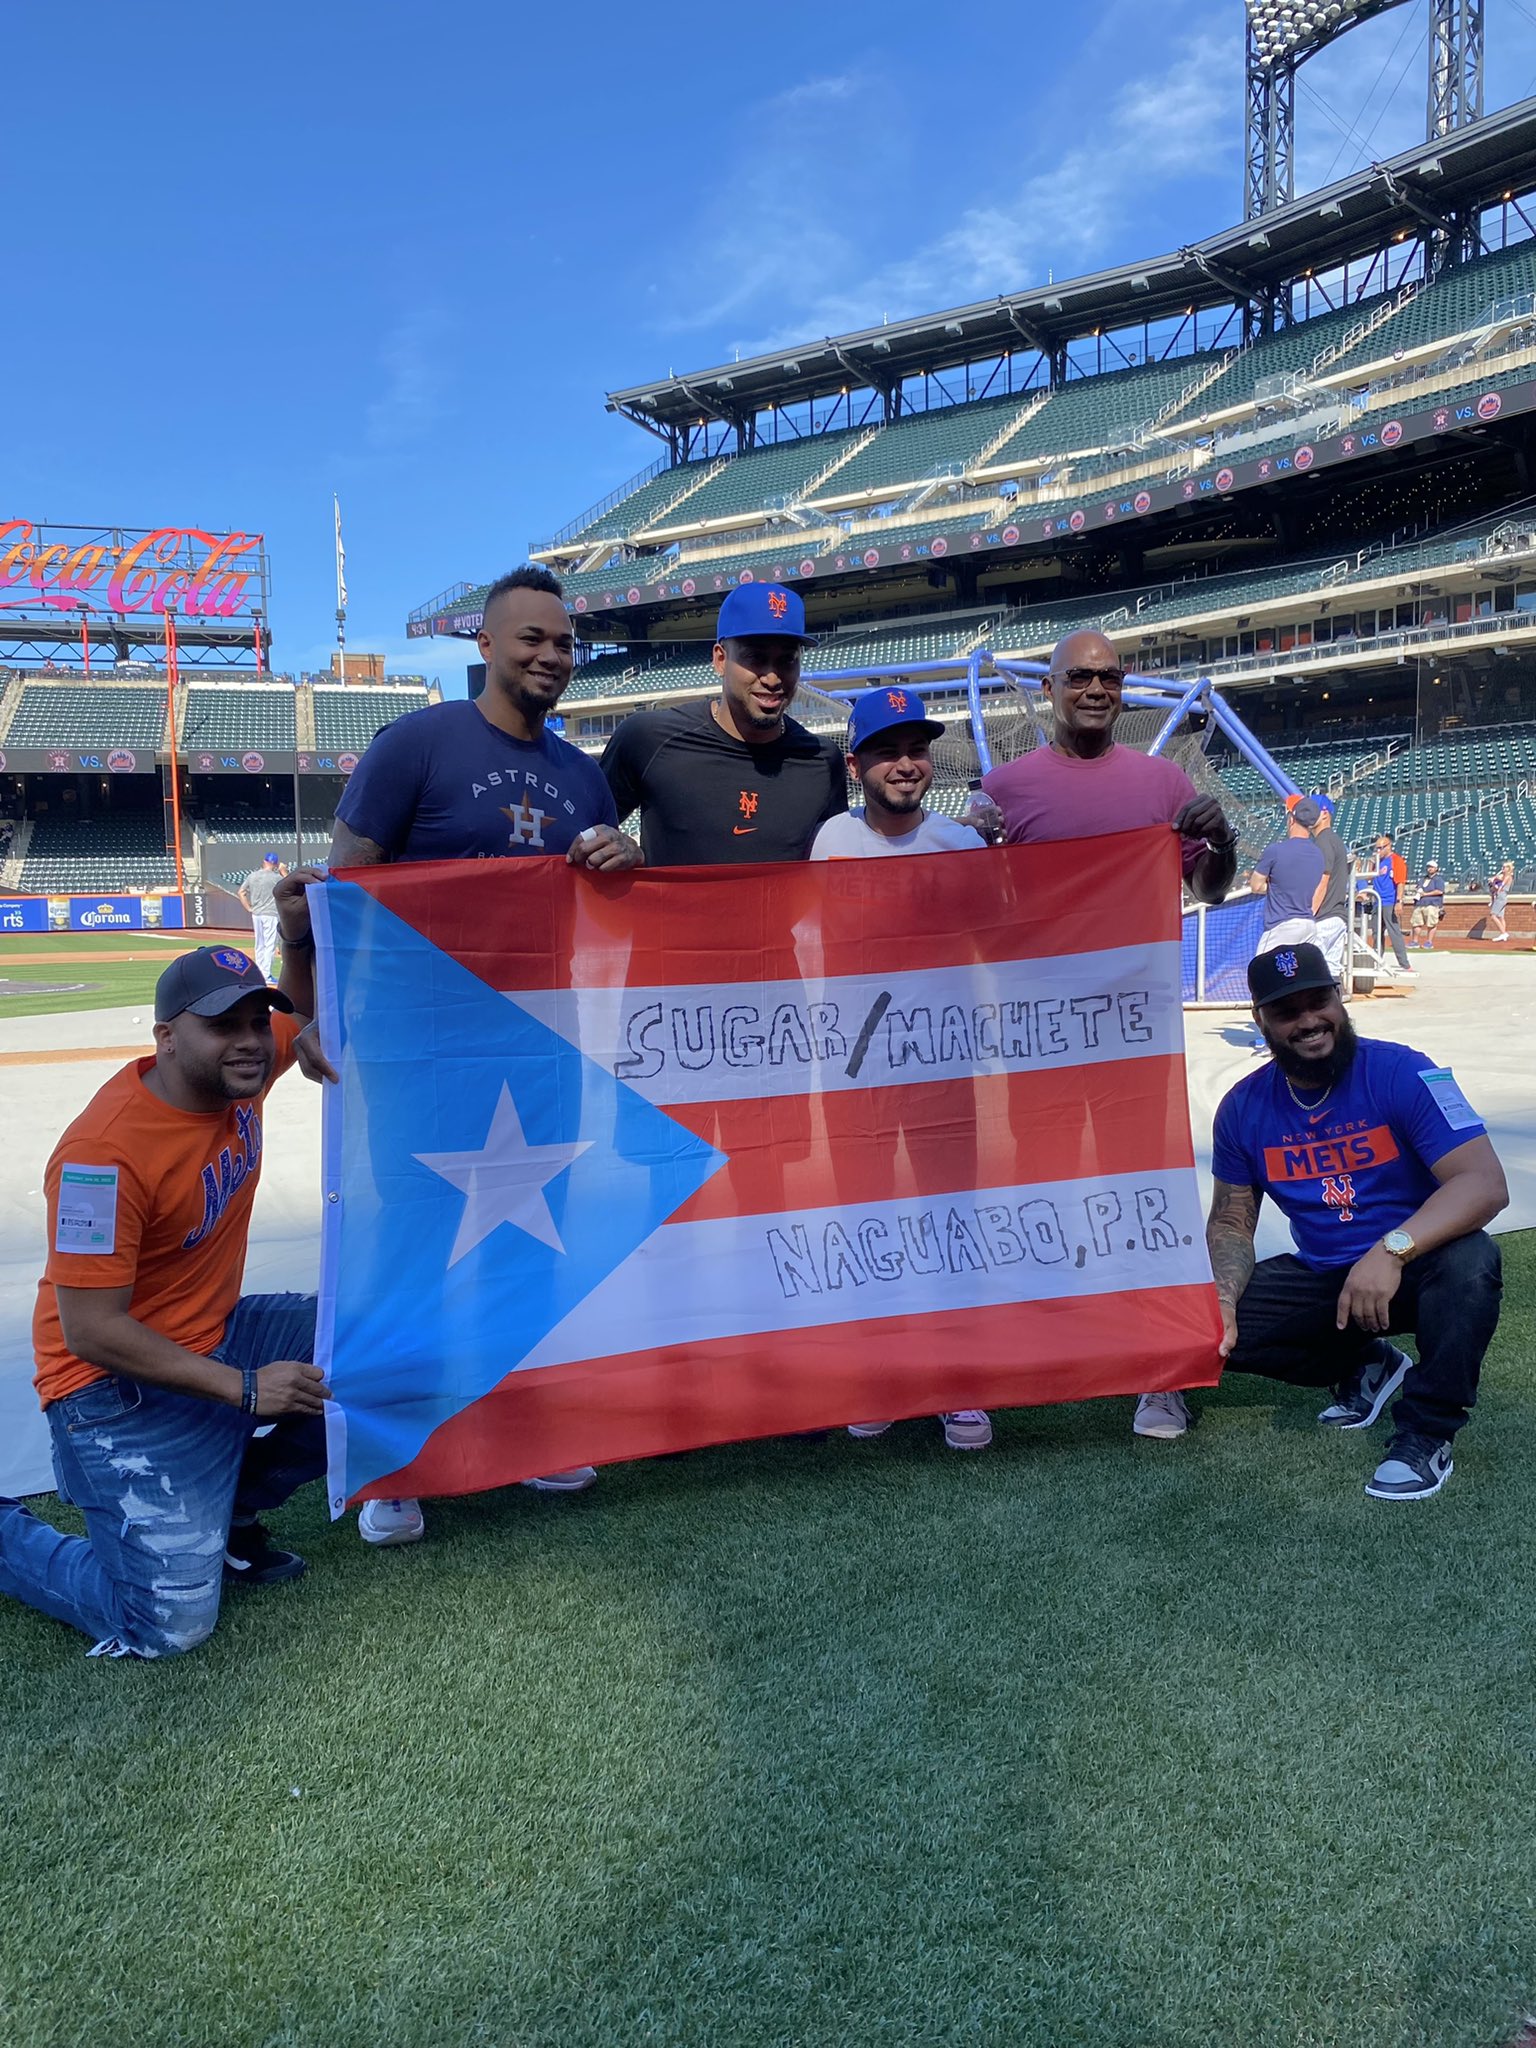 Danny Torres on X: Tonight at Citi Field, representing their